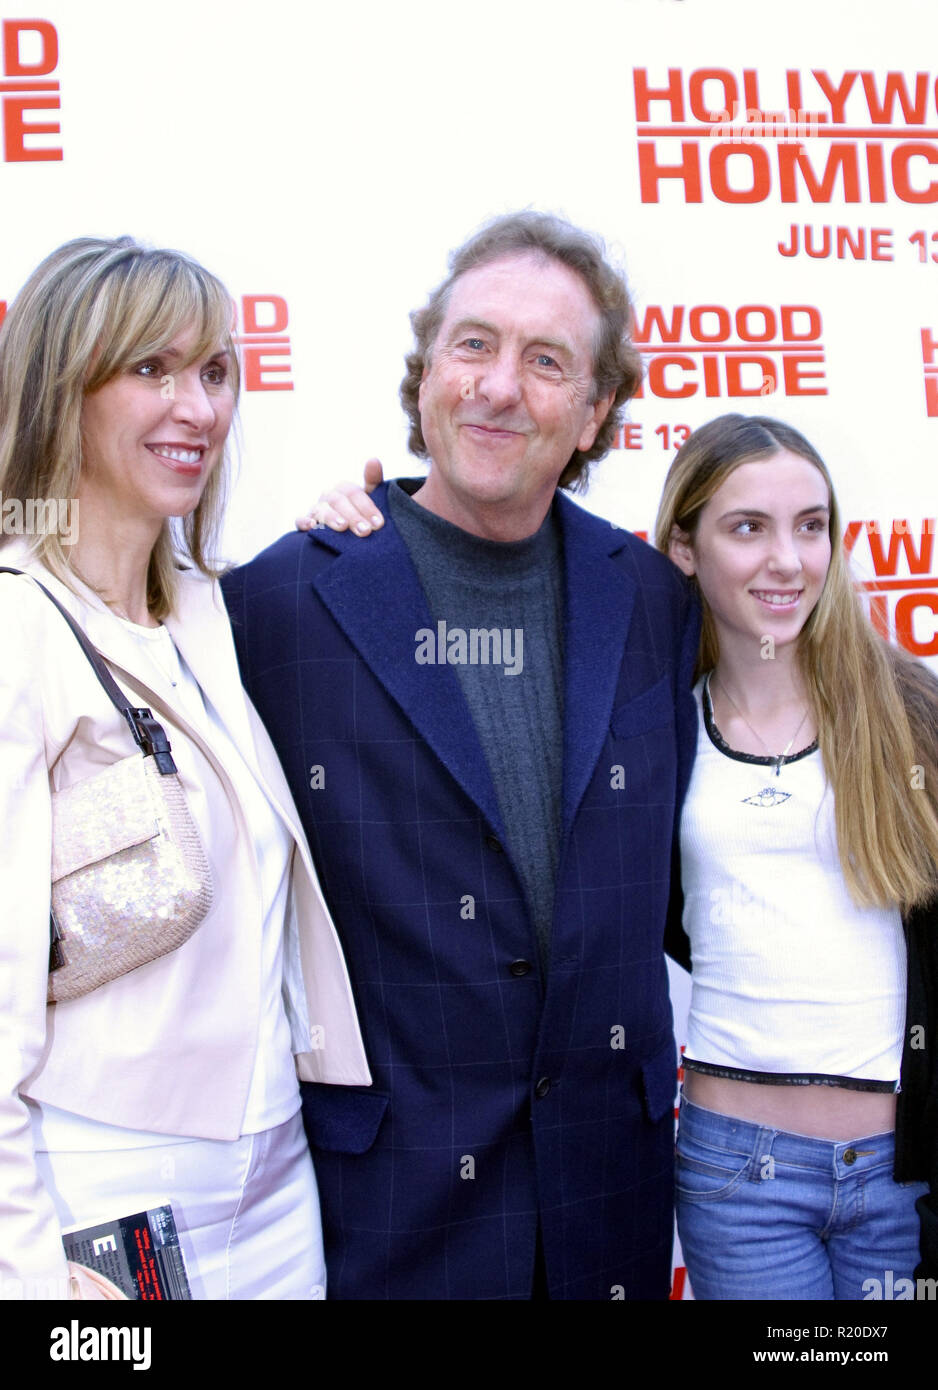 Eric Idle   06/10/03 HOLLYWOOD HOMICIDE @ Mann Village Theatre, Westwood Photo by Izumi Hasegawa/HNW / PictureLux  (June 10, 2003) Stock Photo